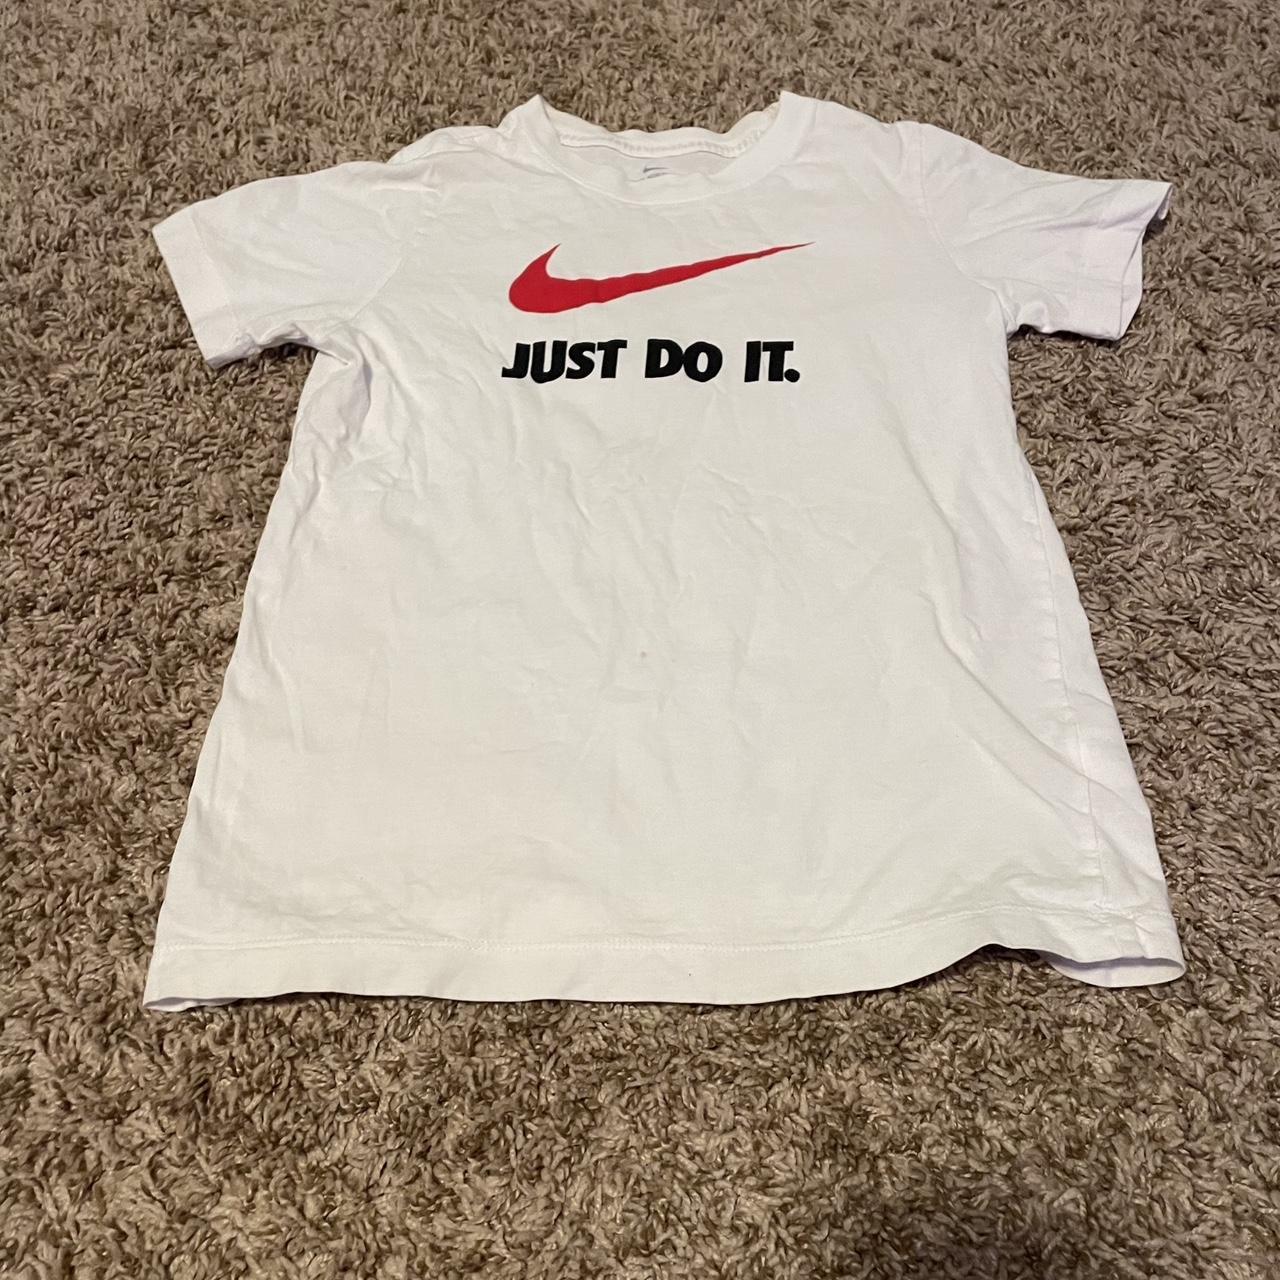 Nike Red and White T-shirt | Depop